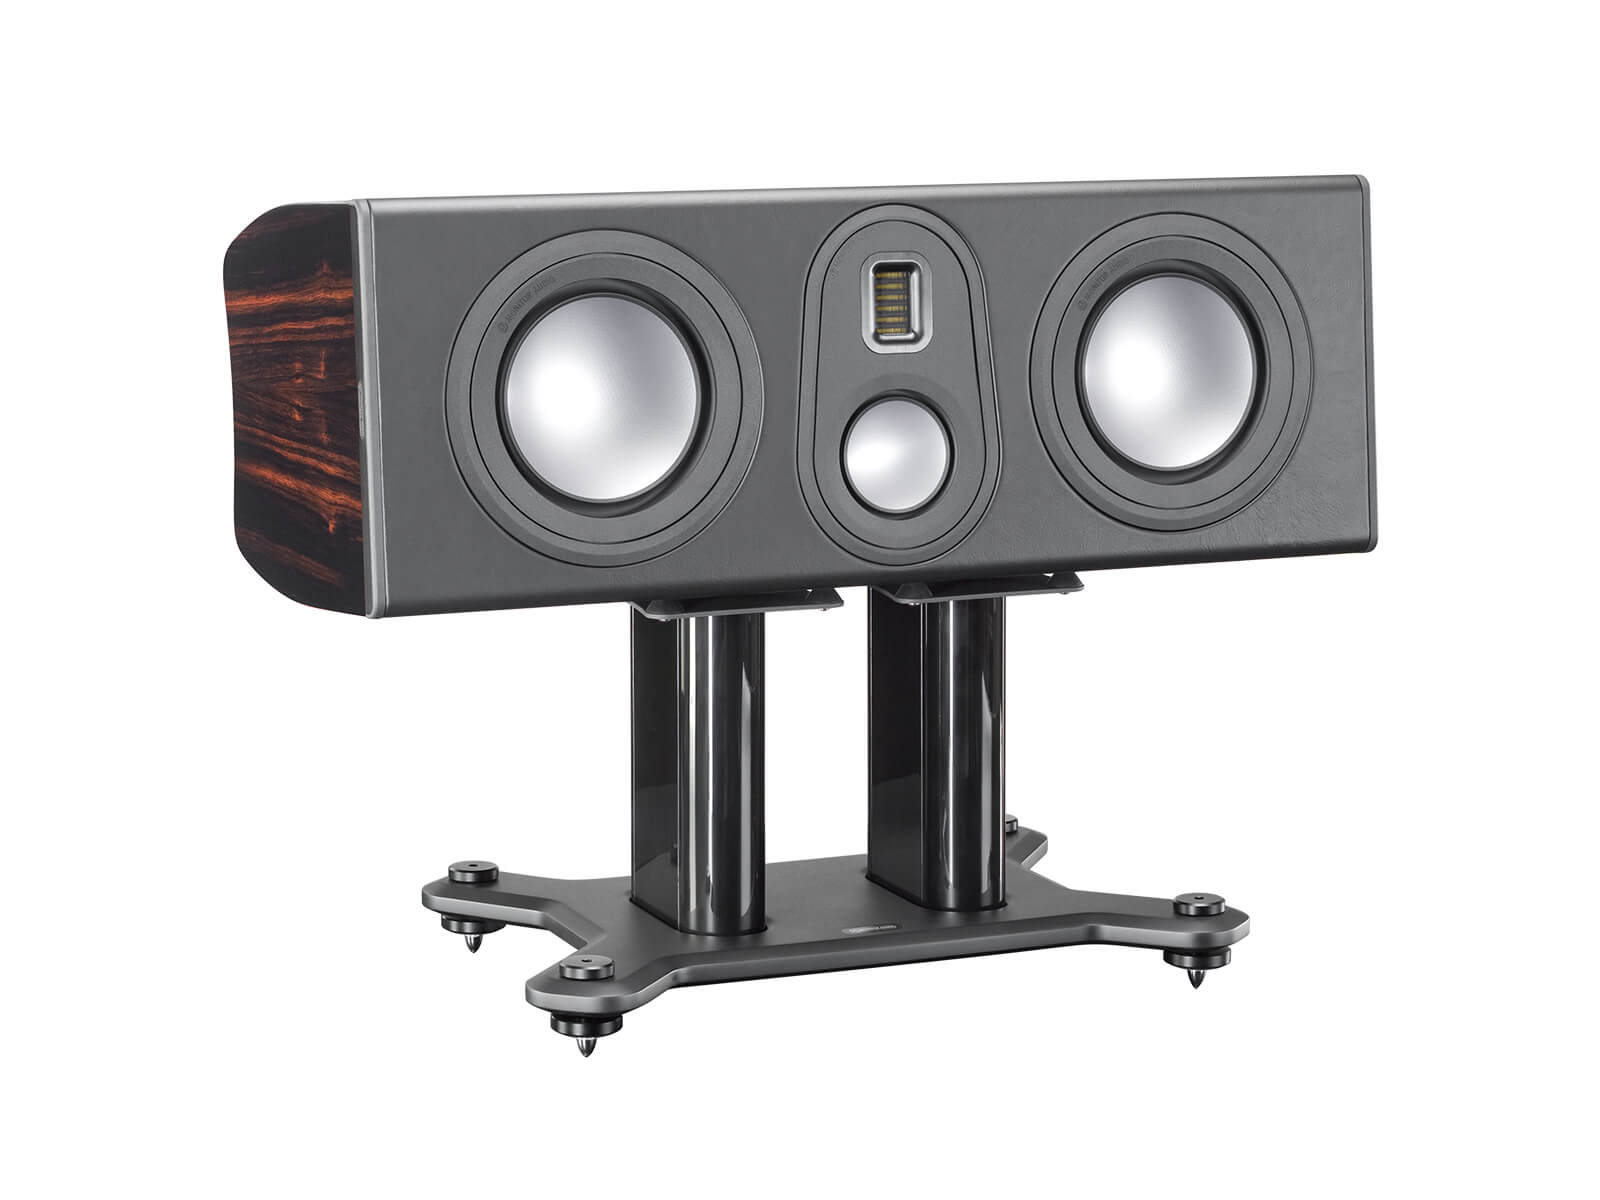 Platinum PLC350 II, grille-less centre channel speakers, with a piano black lacquer finish.